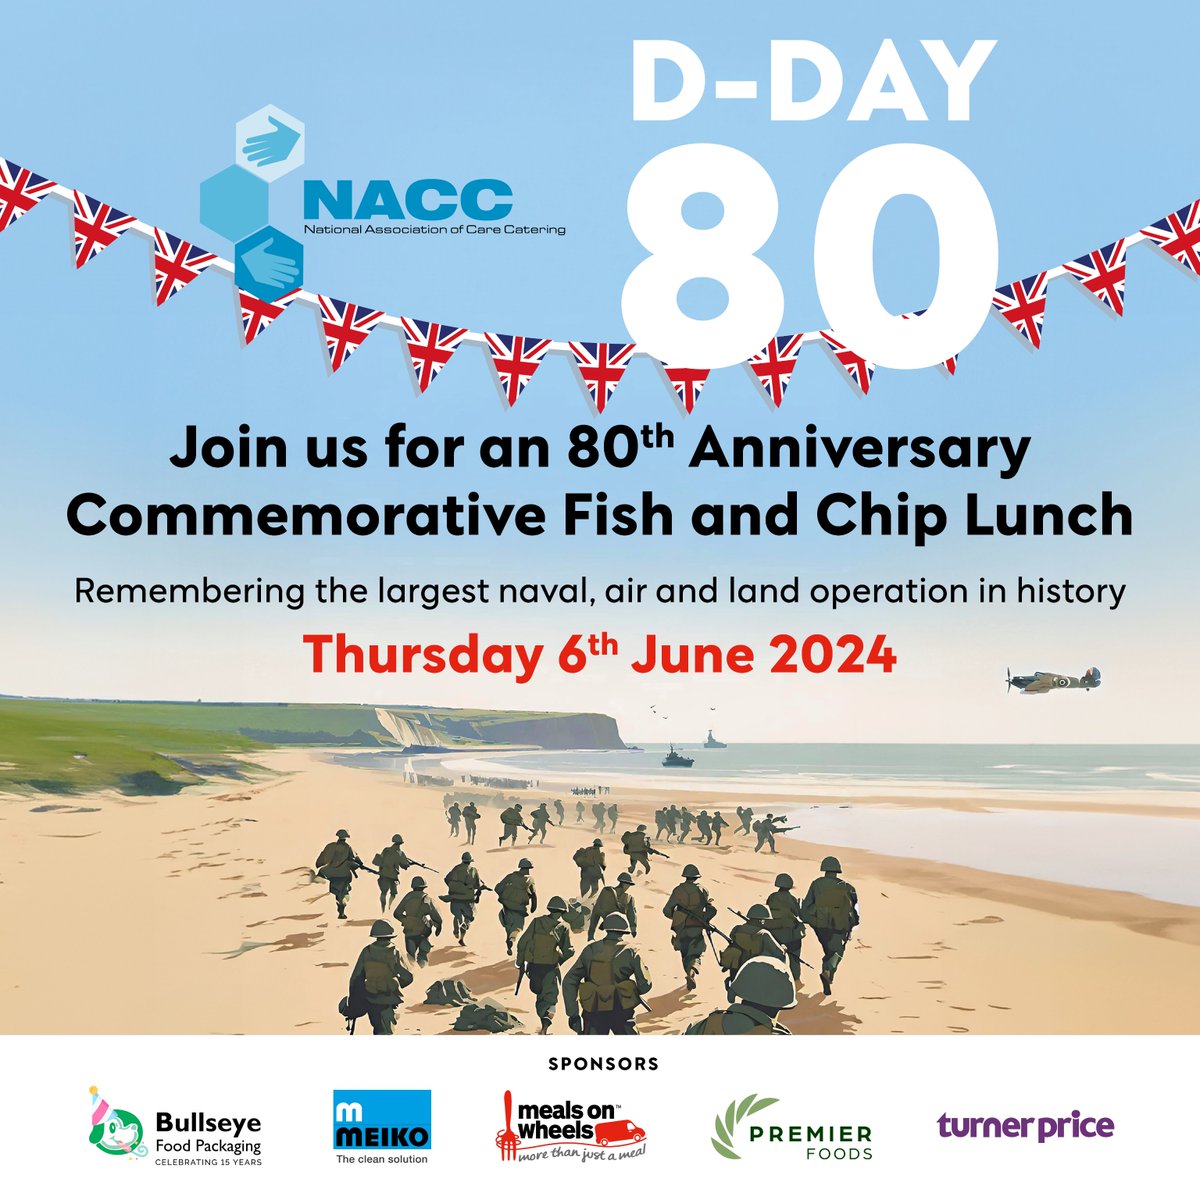 June 6th, 2024, marks, the 80th Anniversary of D-Day. The NACC would like to mark this with a Fish and Chip day. Visit our website for FREE resources to support you in planning and commemorating - t.ly/6cM3C #D-DayFishandChips #NACCCaterCare #CareCatering